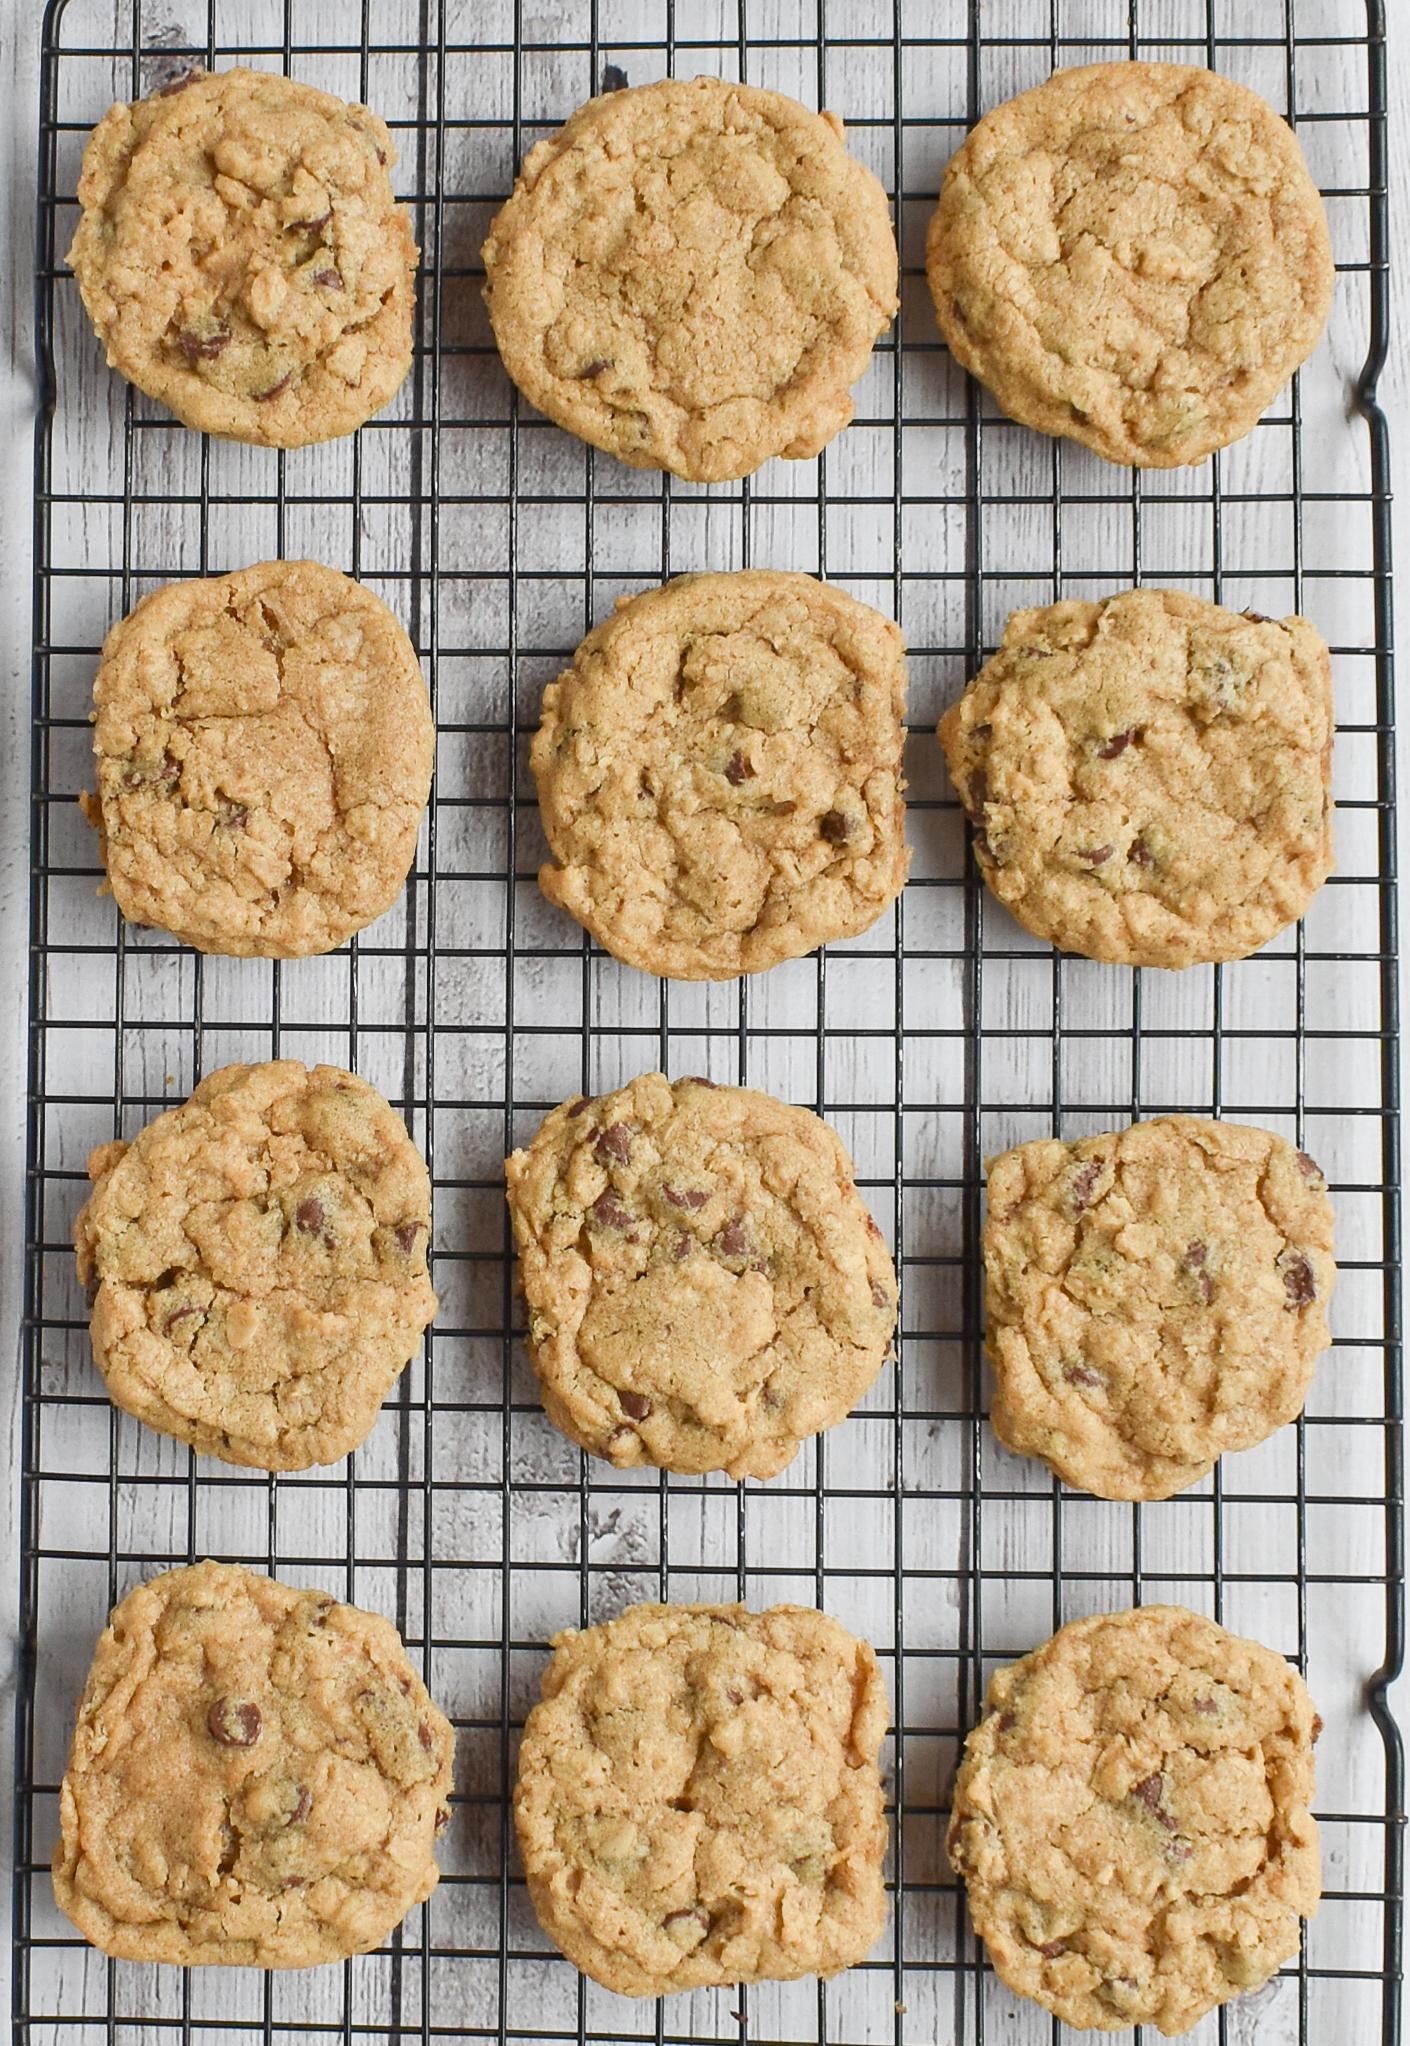  Keep things simple with a batch of these easy-to-make gluten-free cookies